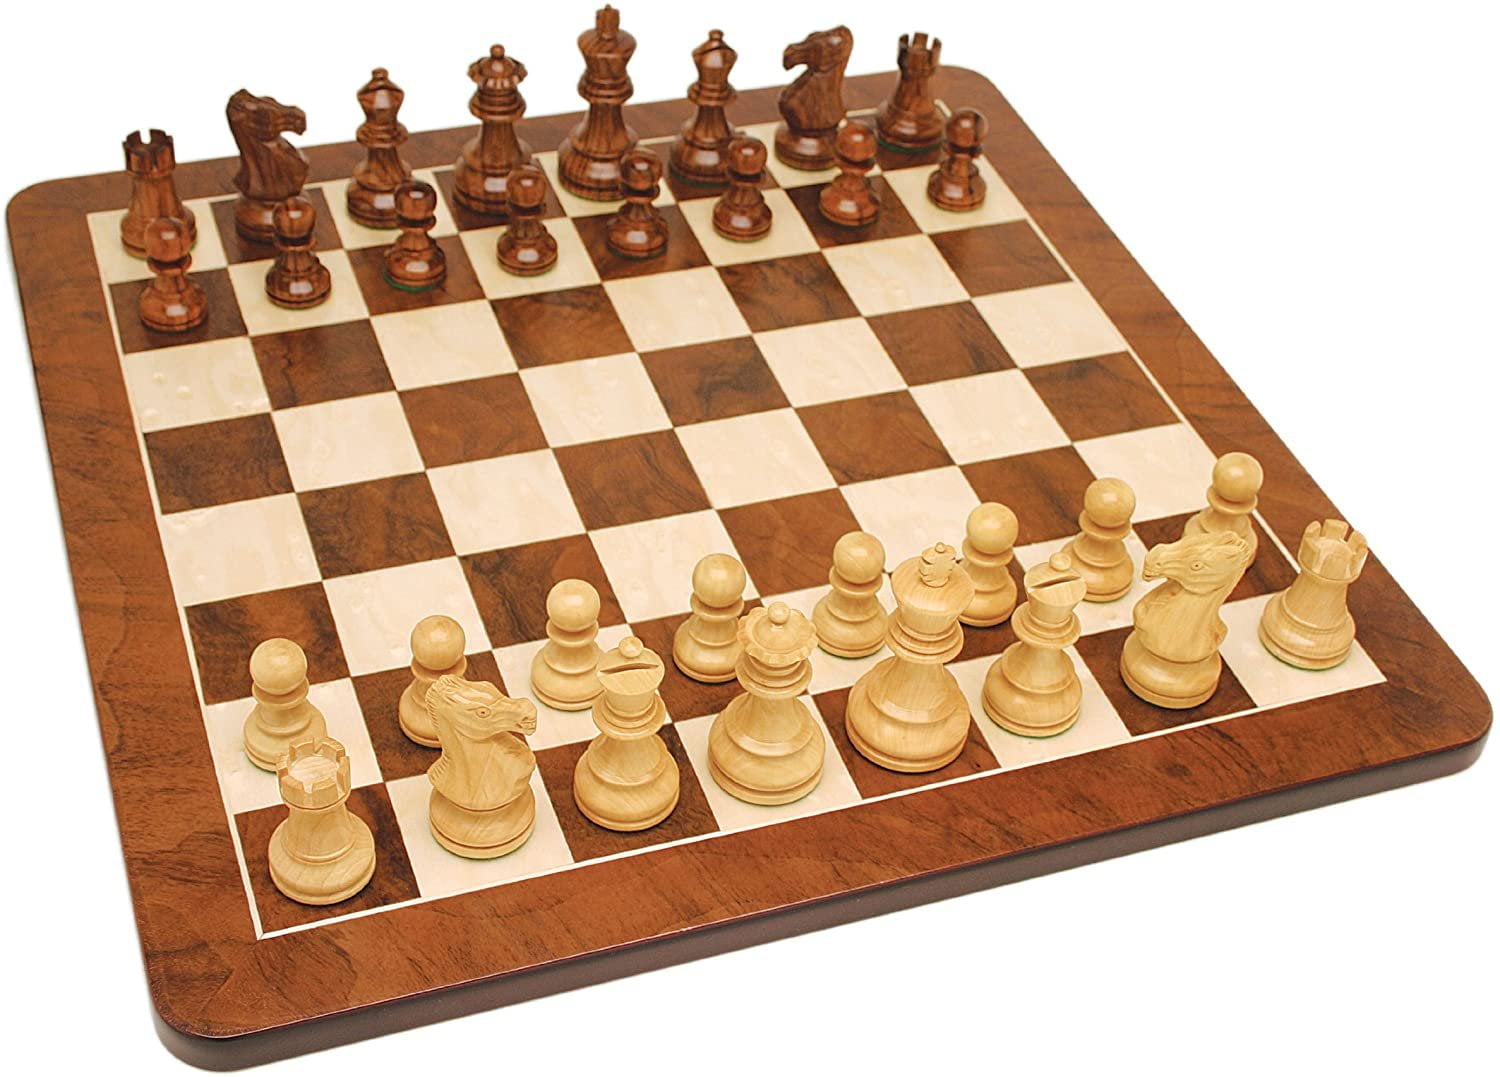 VIKING STYLE CHESS SET in 2023  Chess board, Strategy board games, Wooden  board games